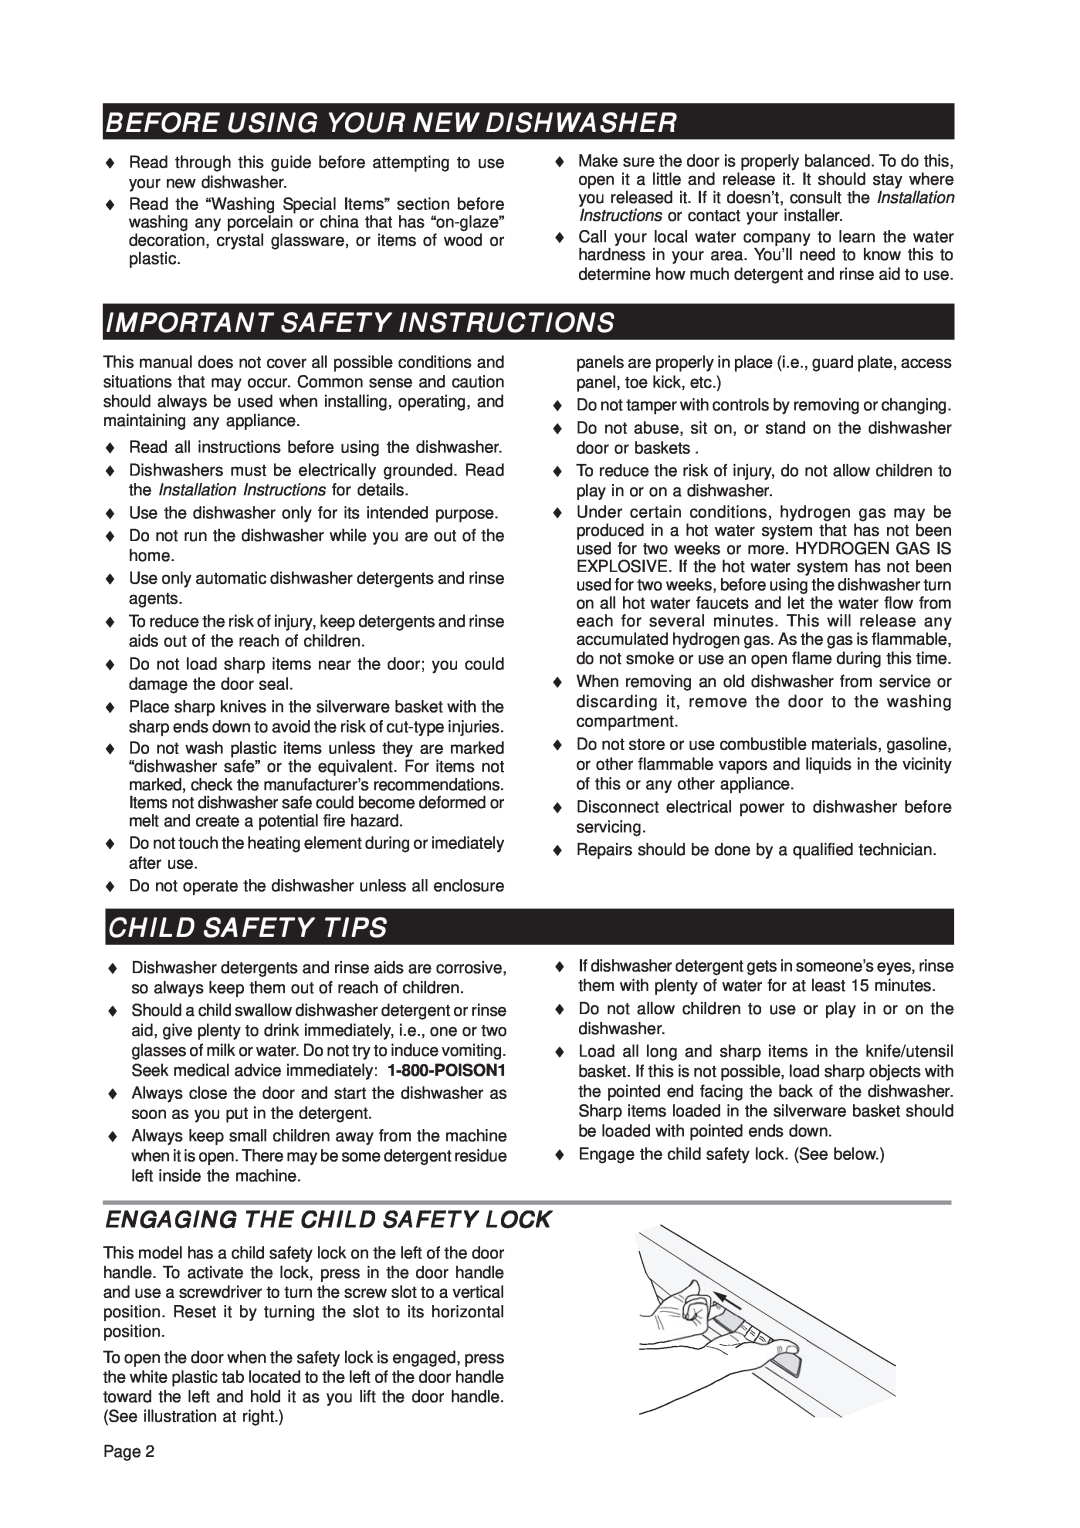 Asko D3122 important safety instructions Before Using Your New Dishwasher, Important Safety Instructions, Child Safety Tips 